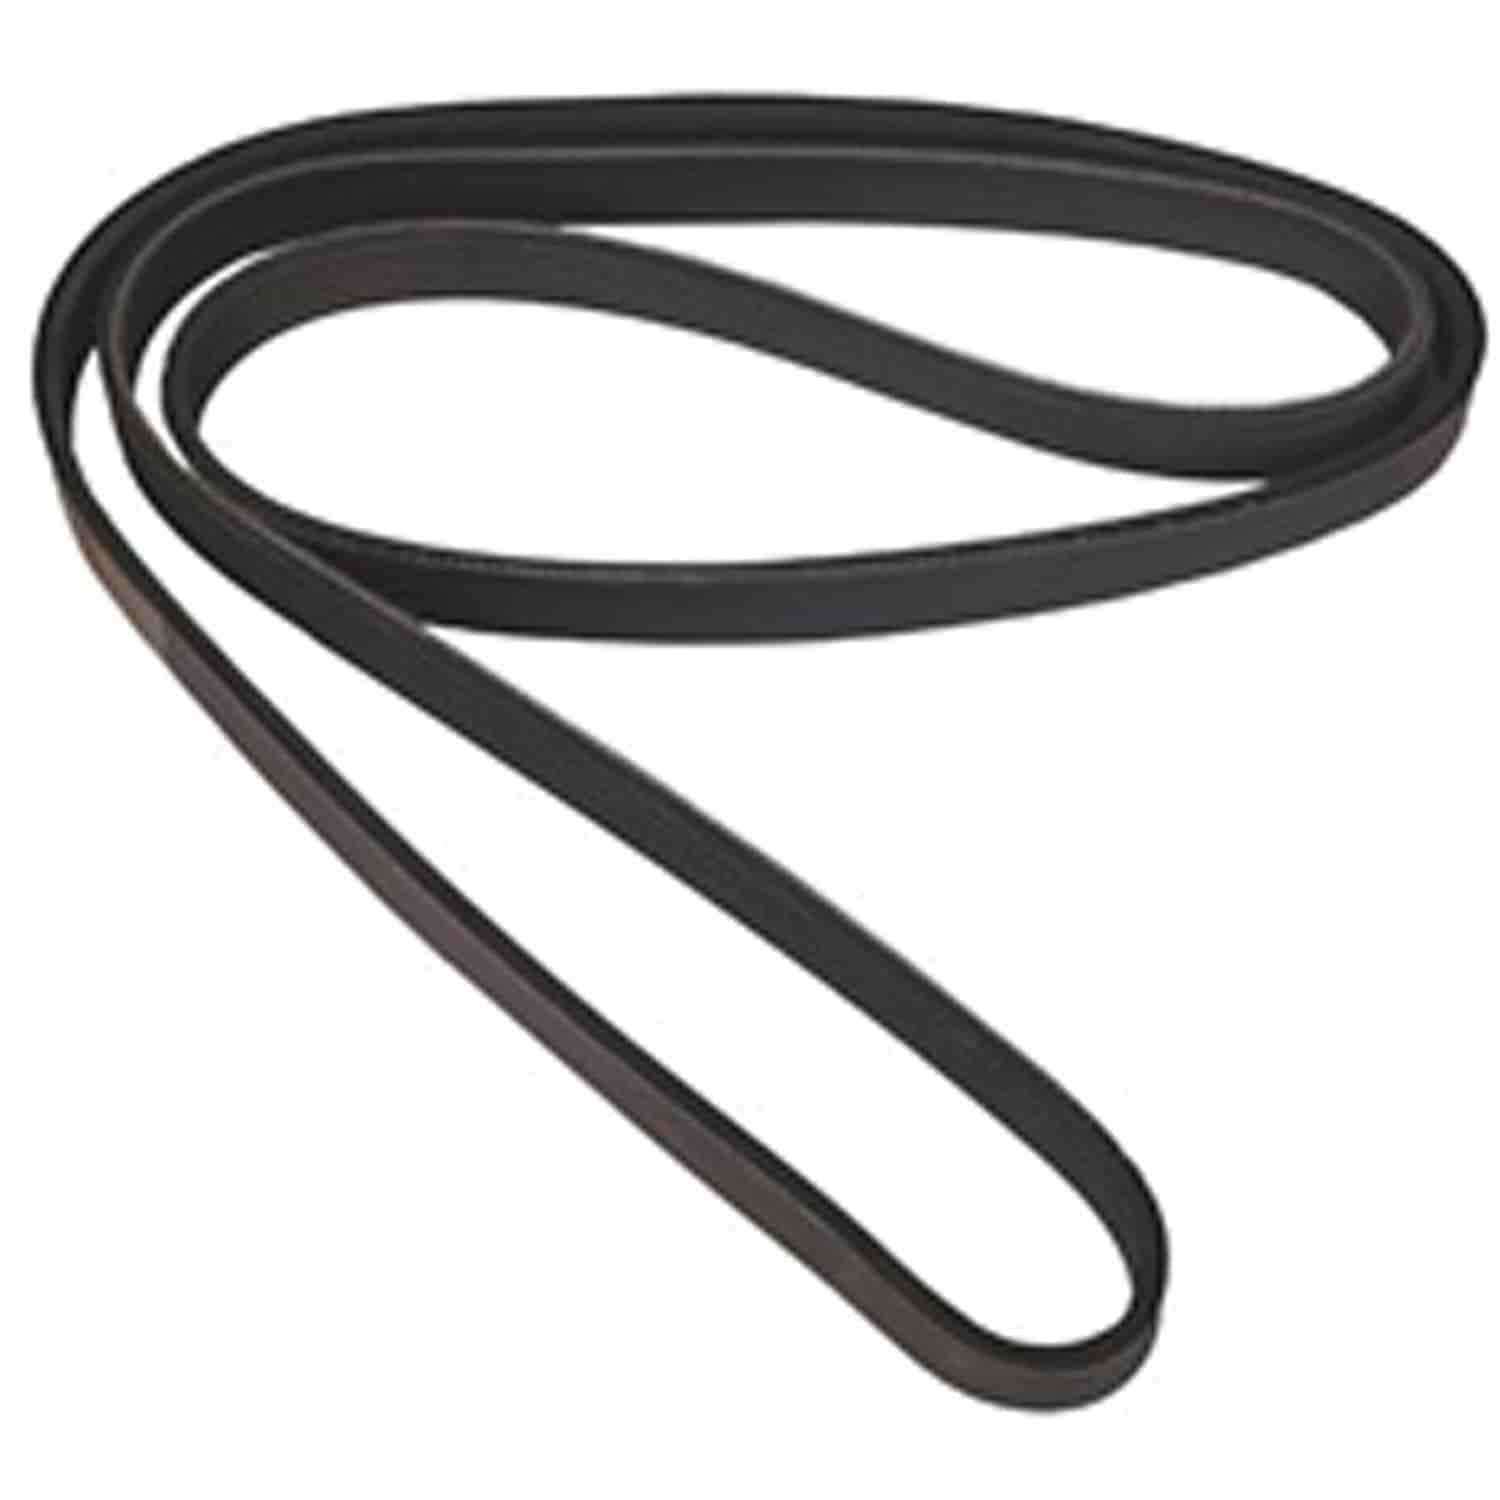 This serpentine belt from Omix-ADA fits 97-99 Jeep Wrangler TJ with the 4-cylinder or 6-cylinder eng